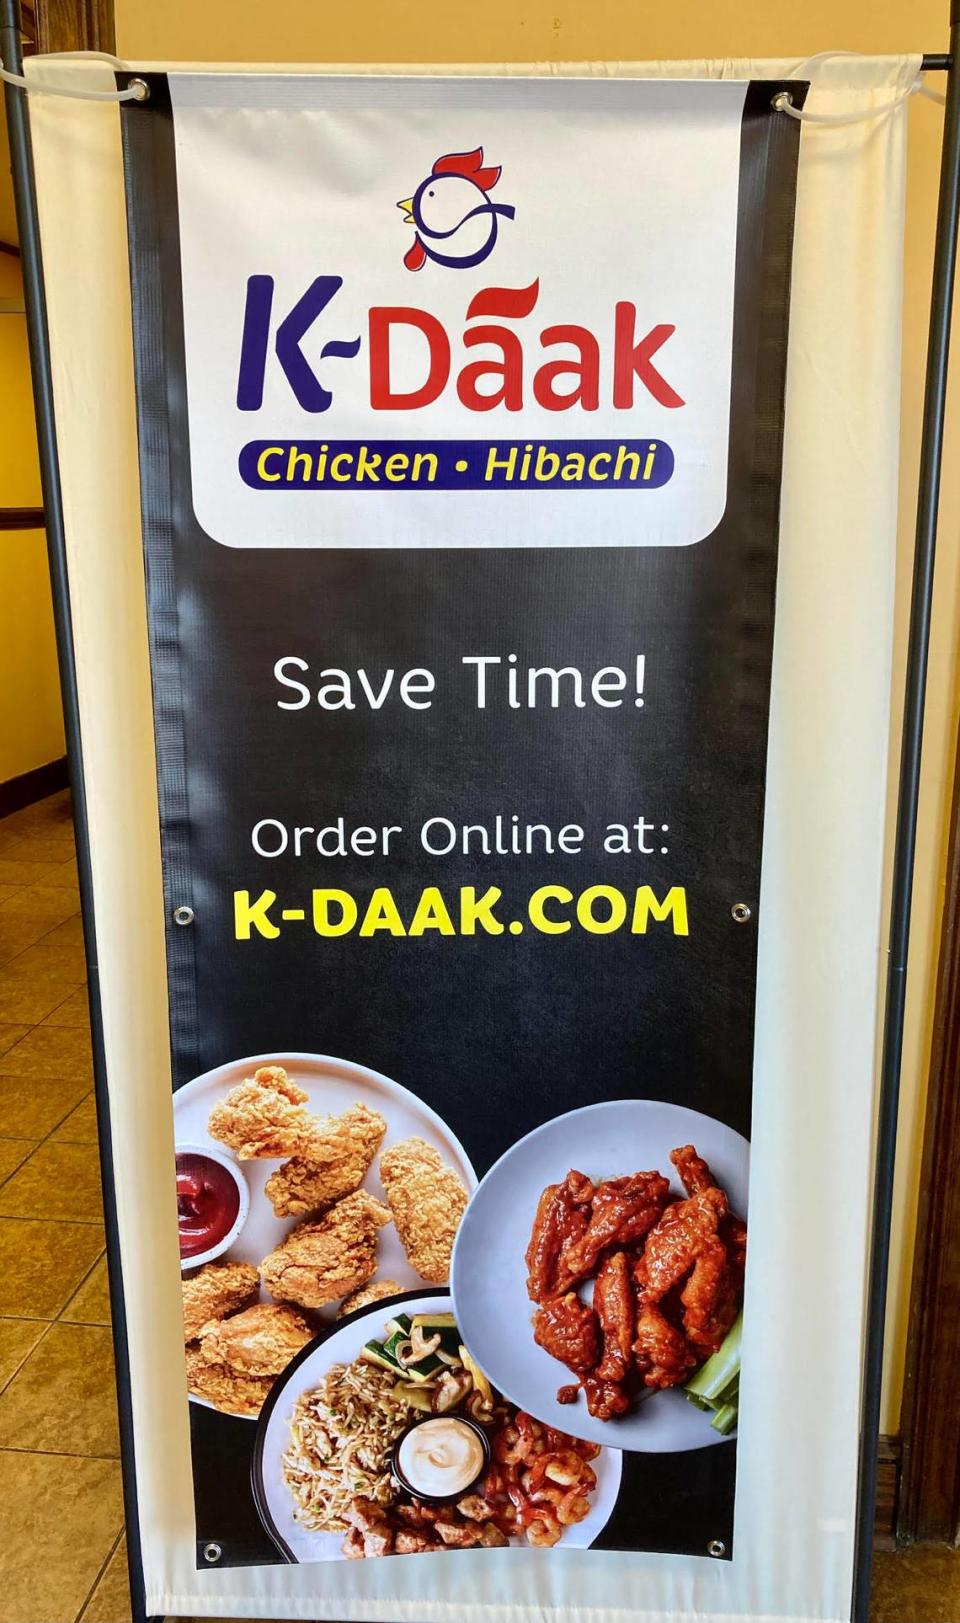 K-Daak, new restaurant at the former Zaxby’s location on Northside Drive, offers Korean-style chicken and hibachi as well as American-style wings with the same recipe as ATown Wings that first opened in Atlanta in 2008. A banner in the restaurant about online ordering.